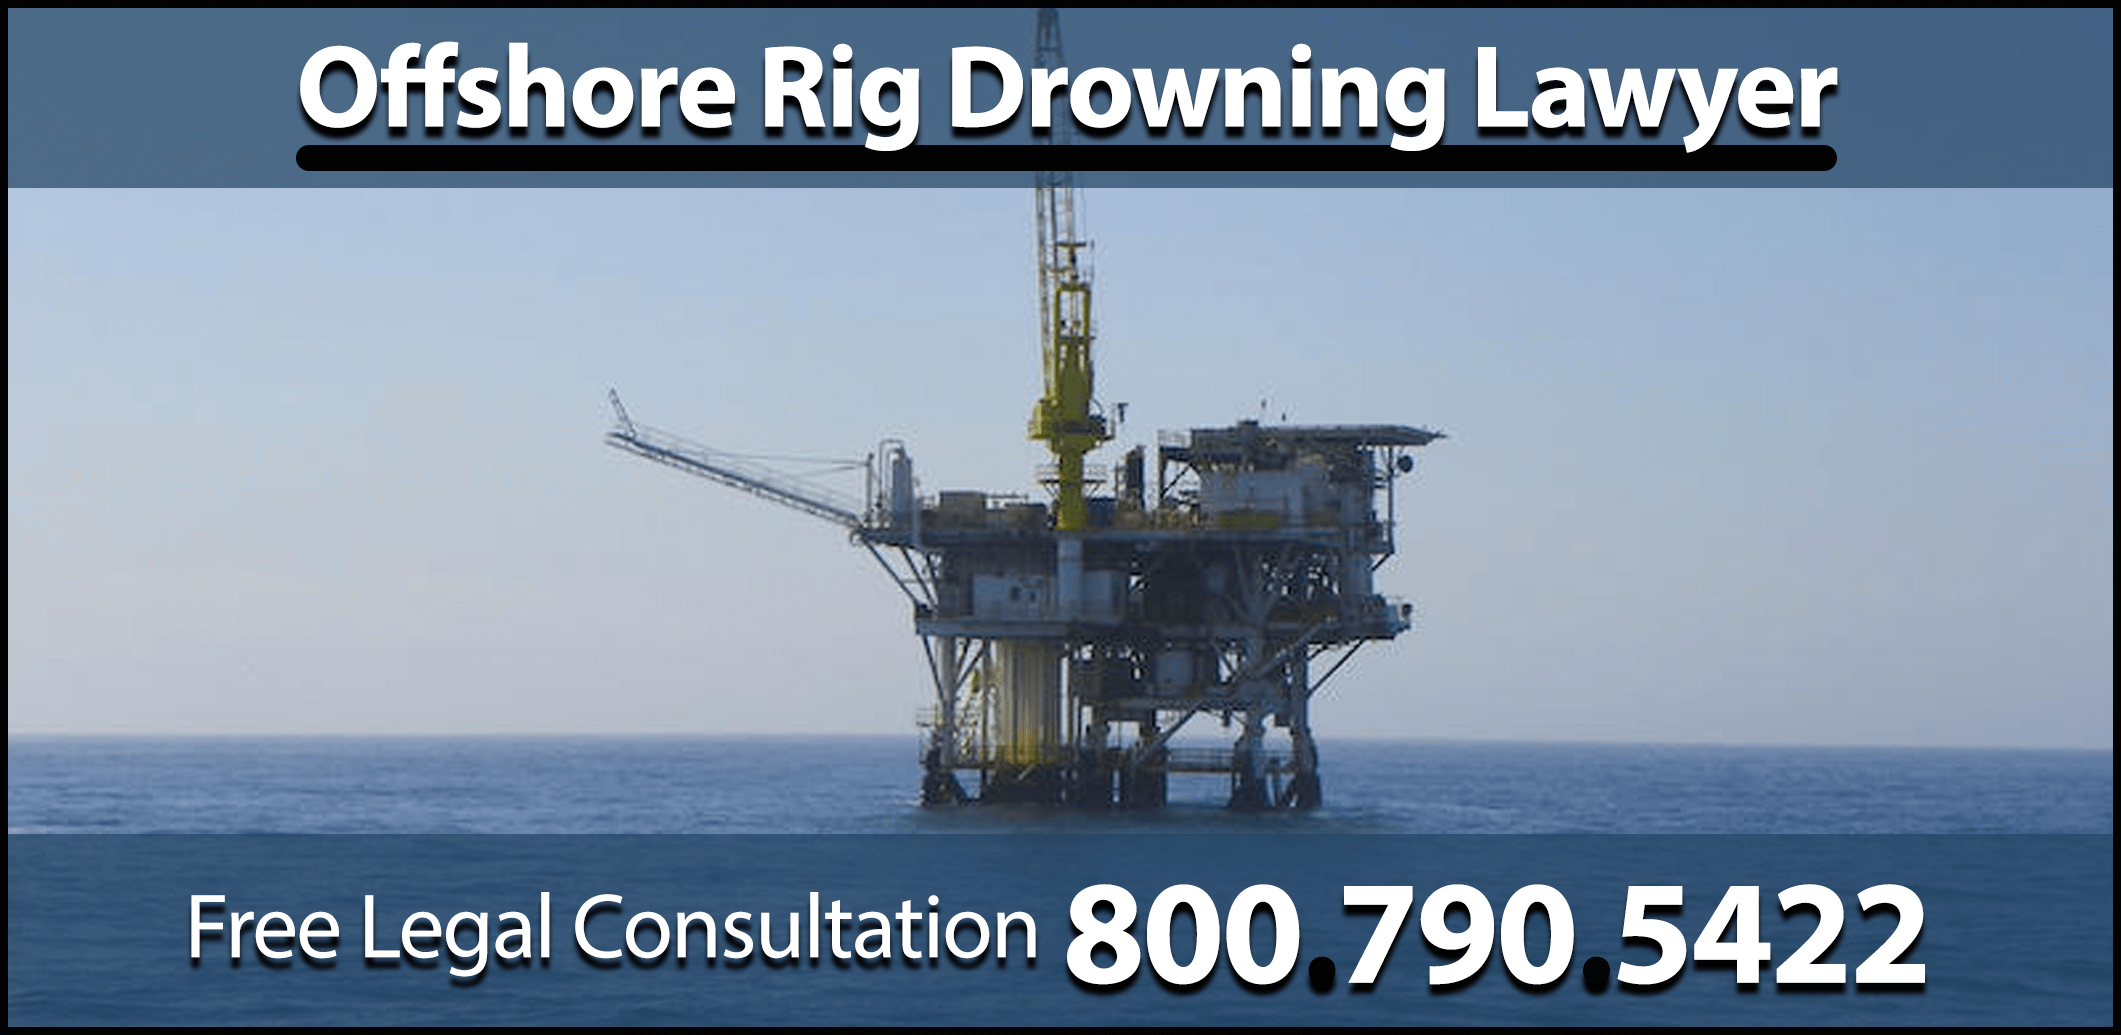 offshore rig drowning accident danger slip fire explosion storm weather medical bills claim compensation sue 